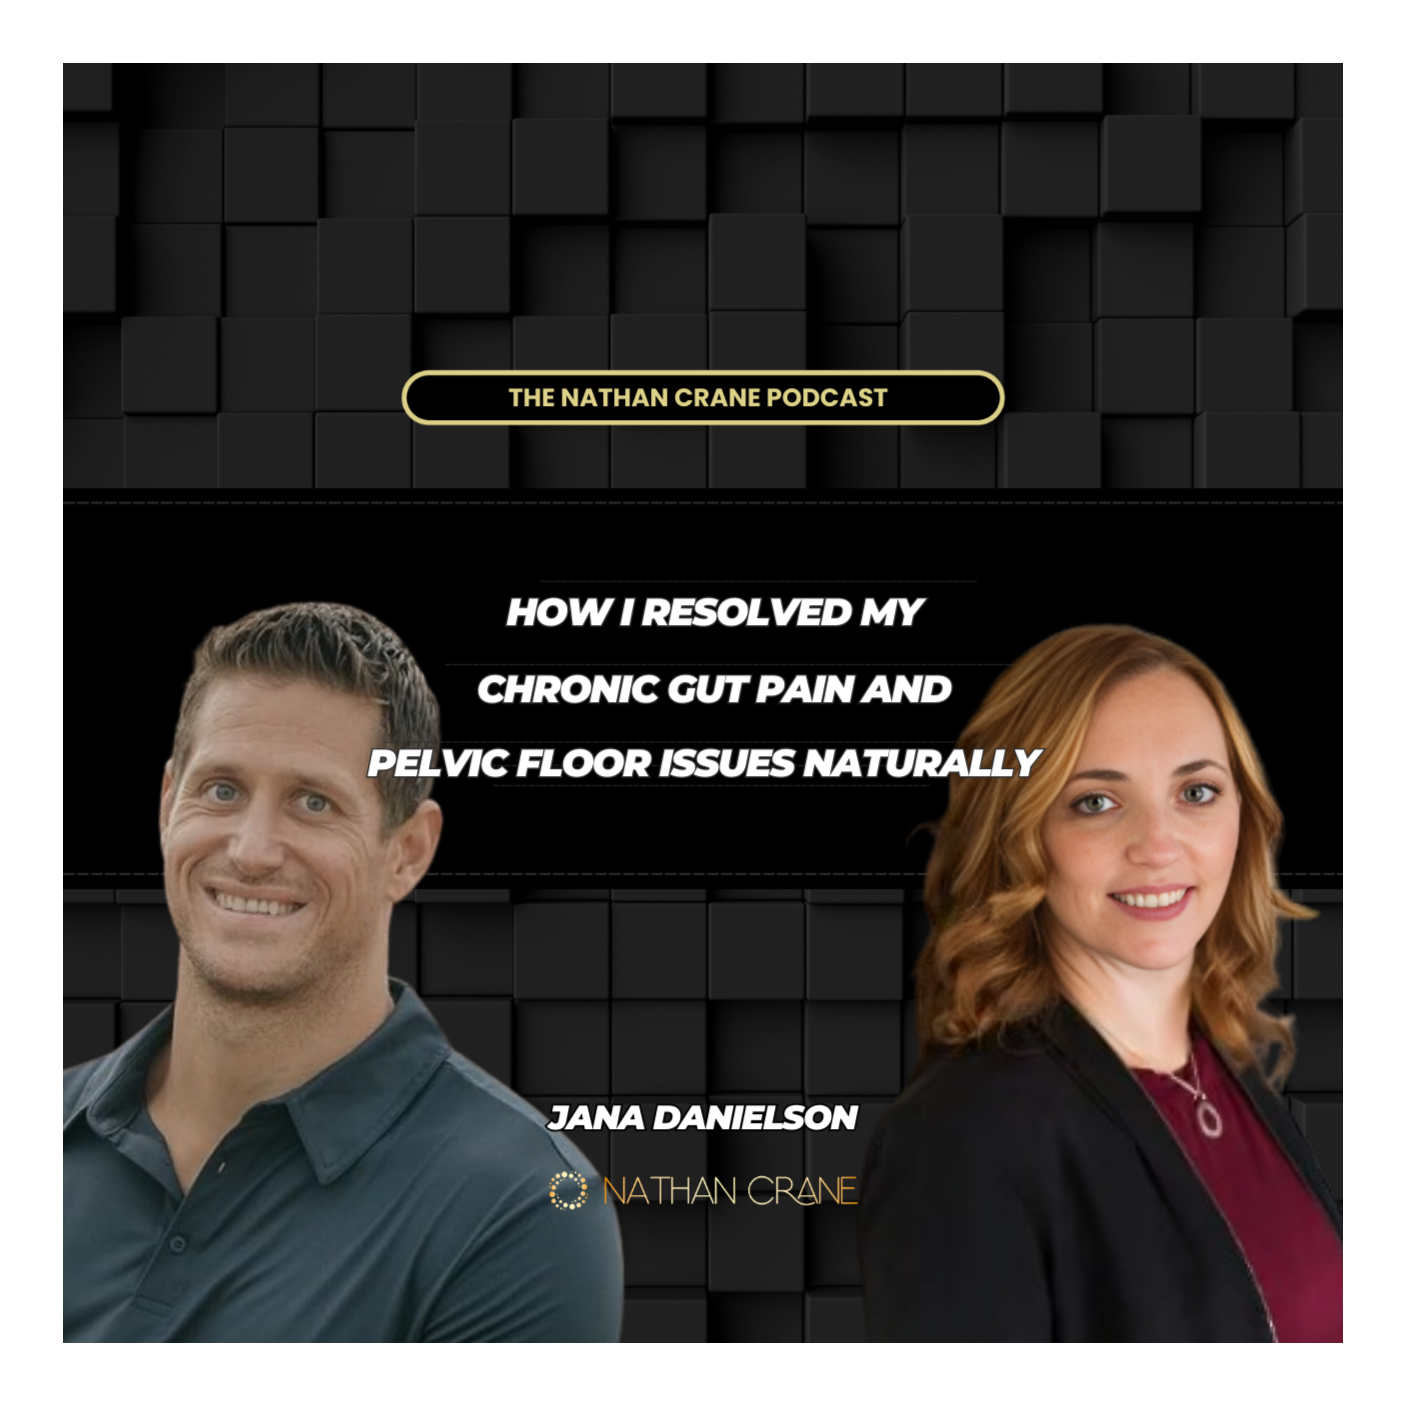 How I resolved my chronic gut pain and pelvic floor issues naturally: Jana Danielson | Nathan Crane Podcast